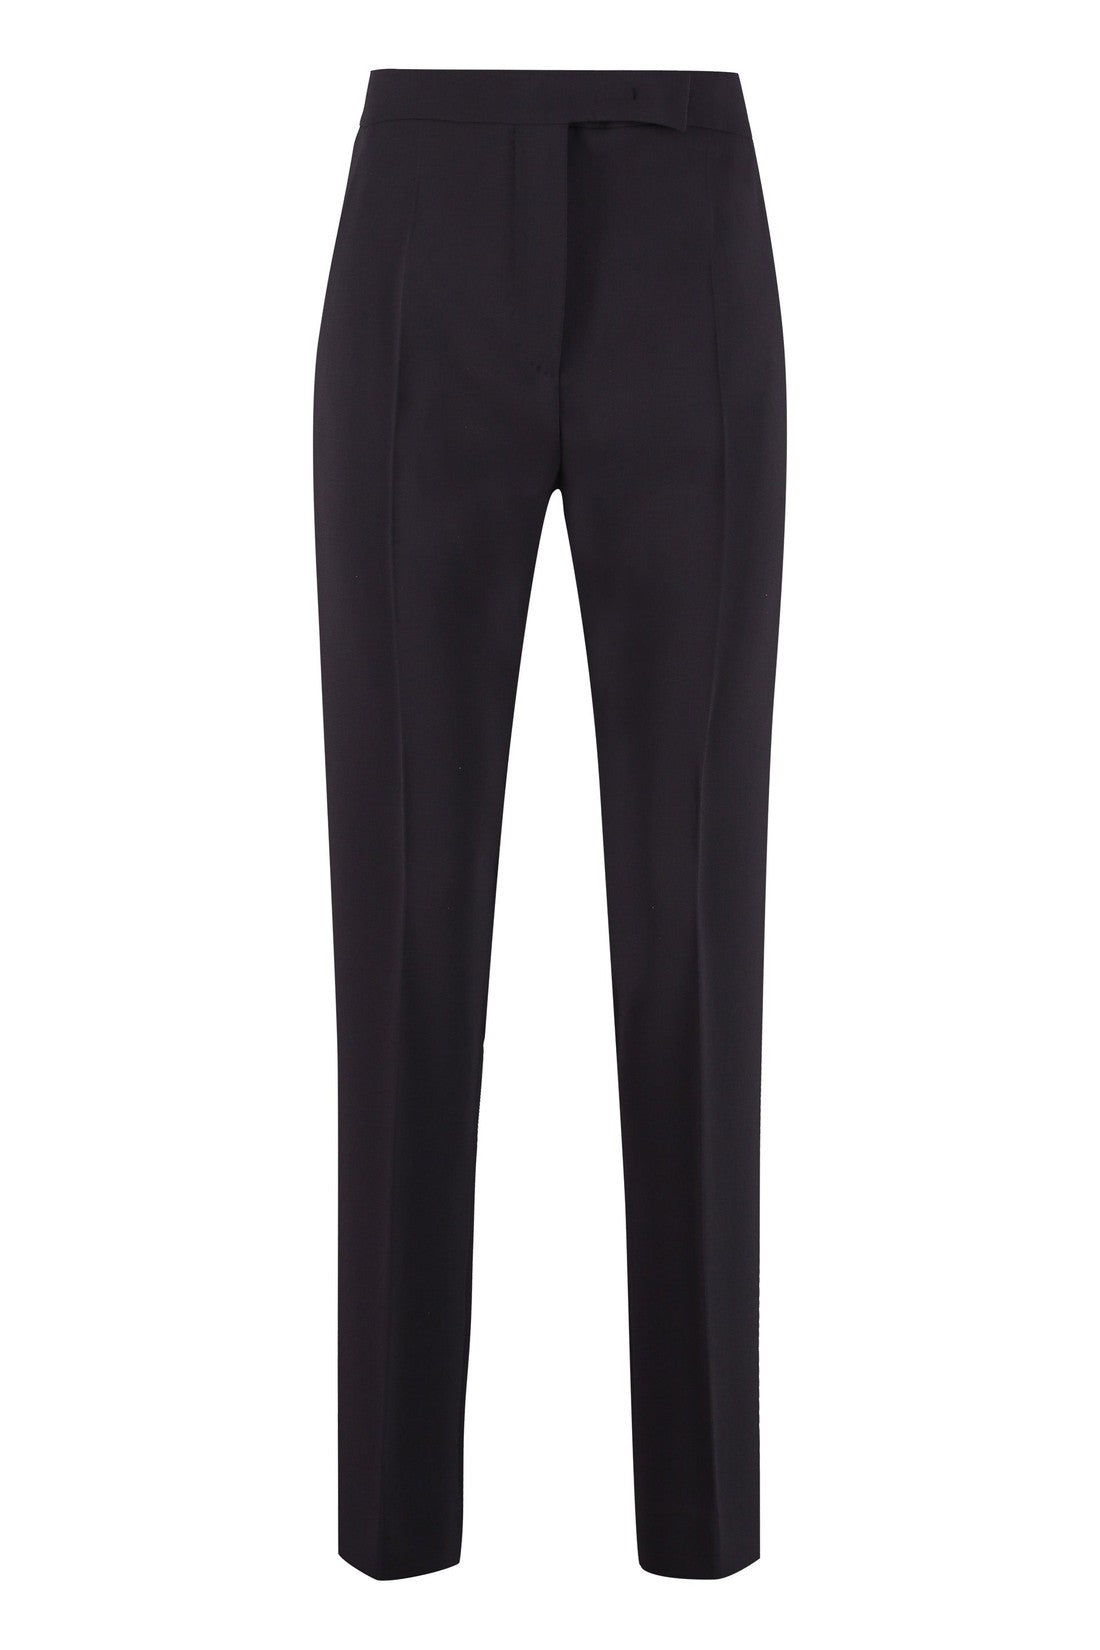 Max Mara-OUTLET-SALE-Anny tailored trousers-ARCHIVIST